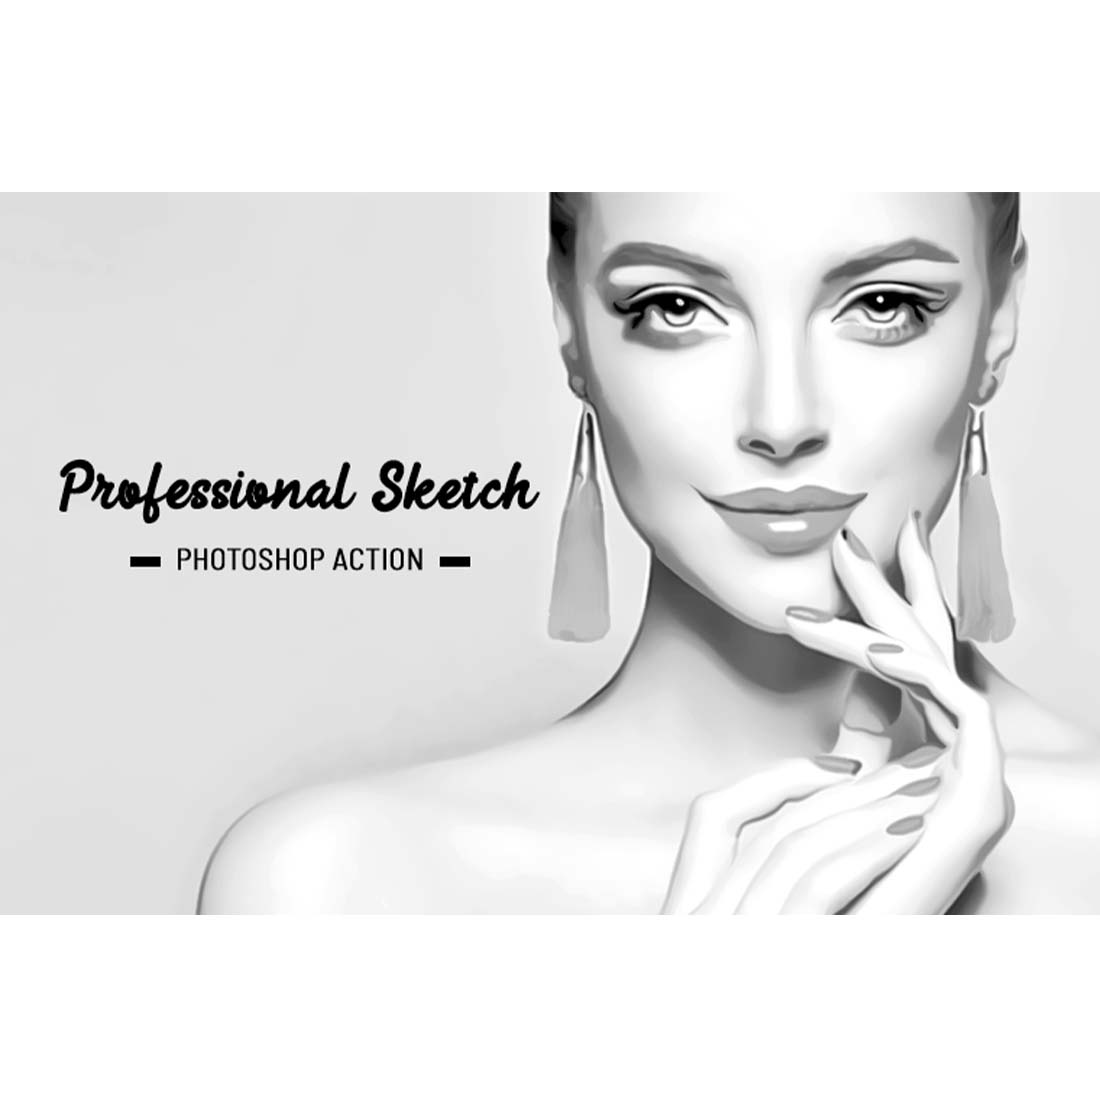 Professional Sketch Photoshop Action cover image.